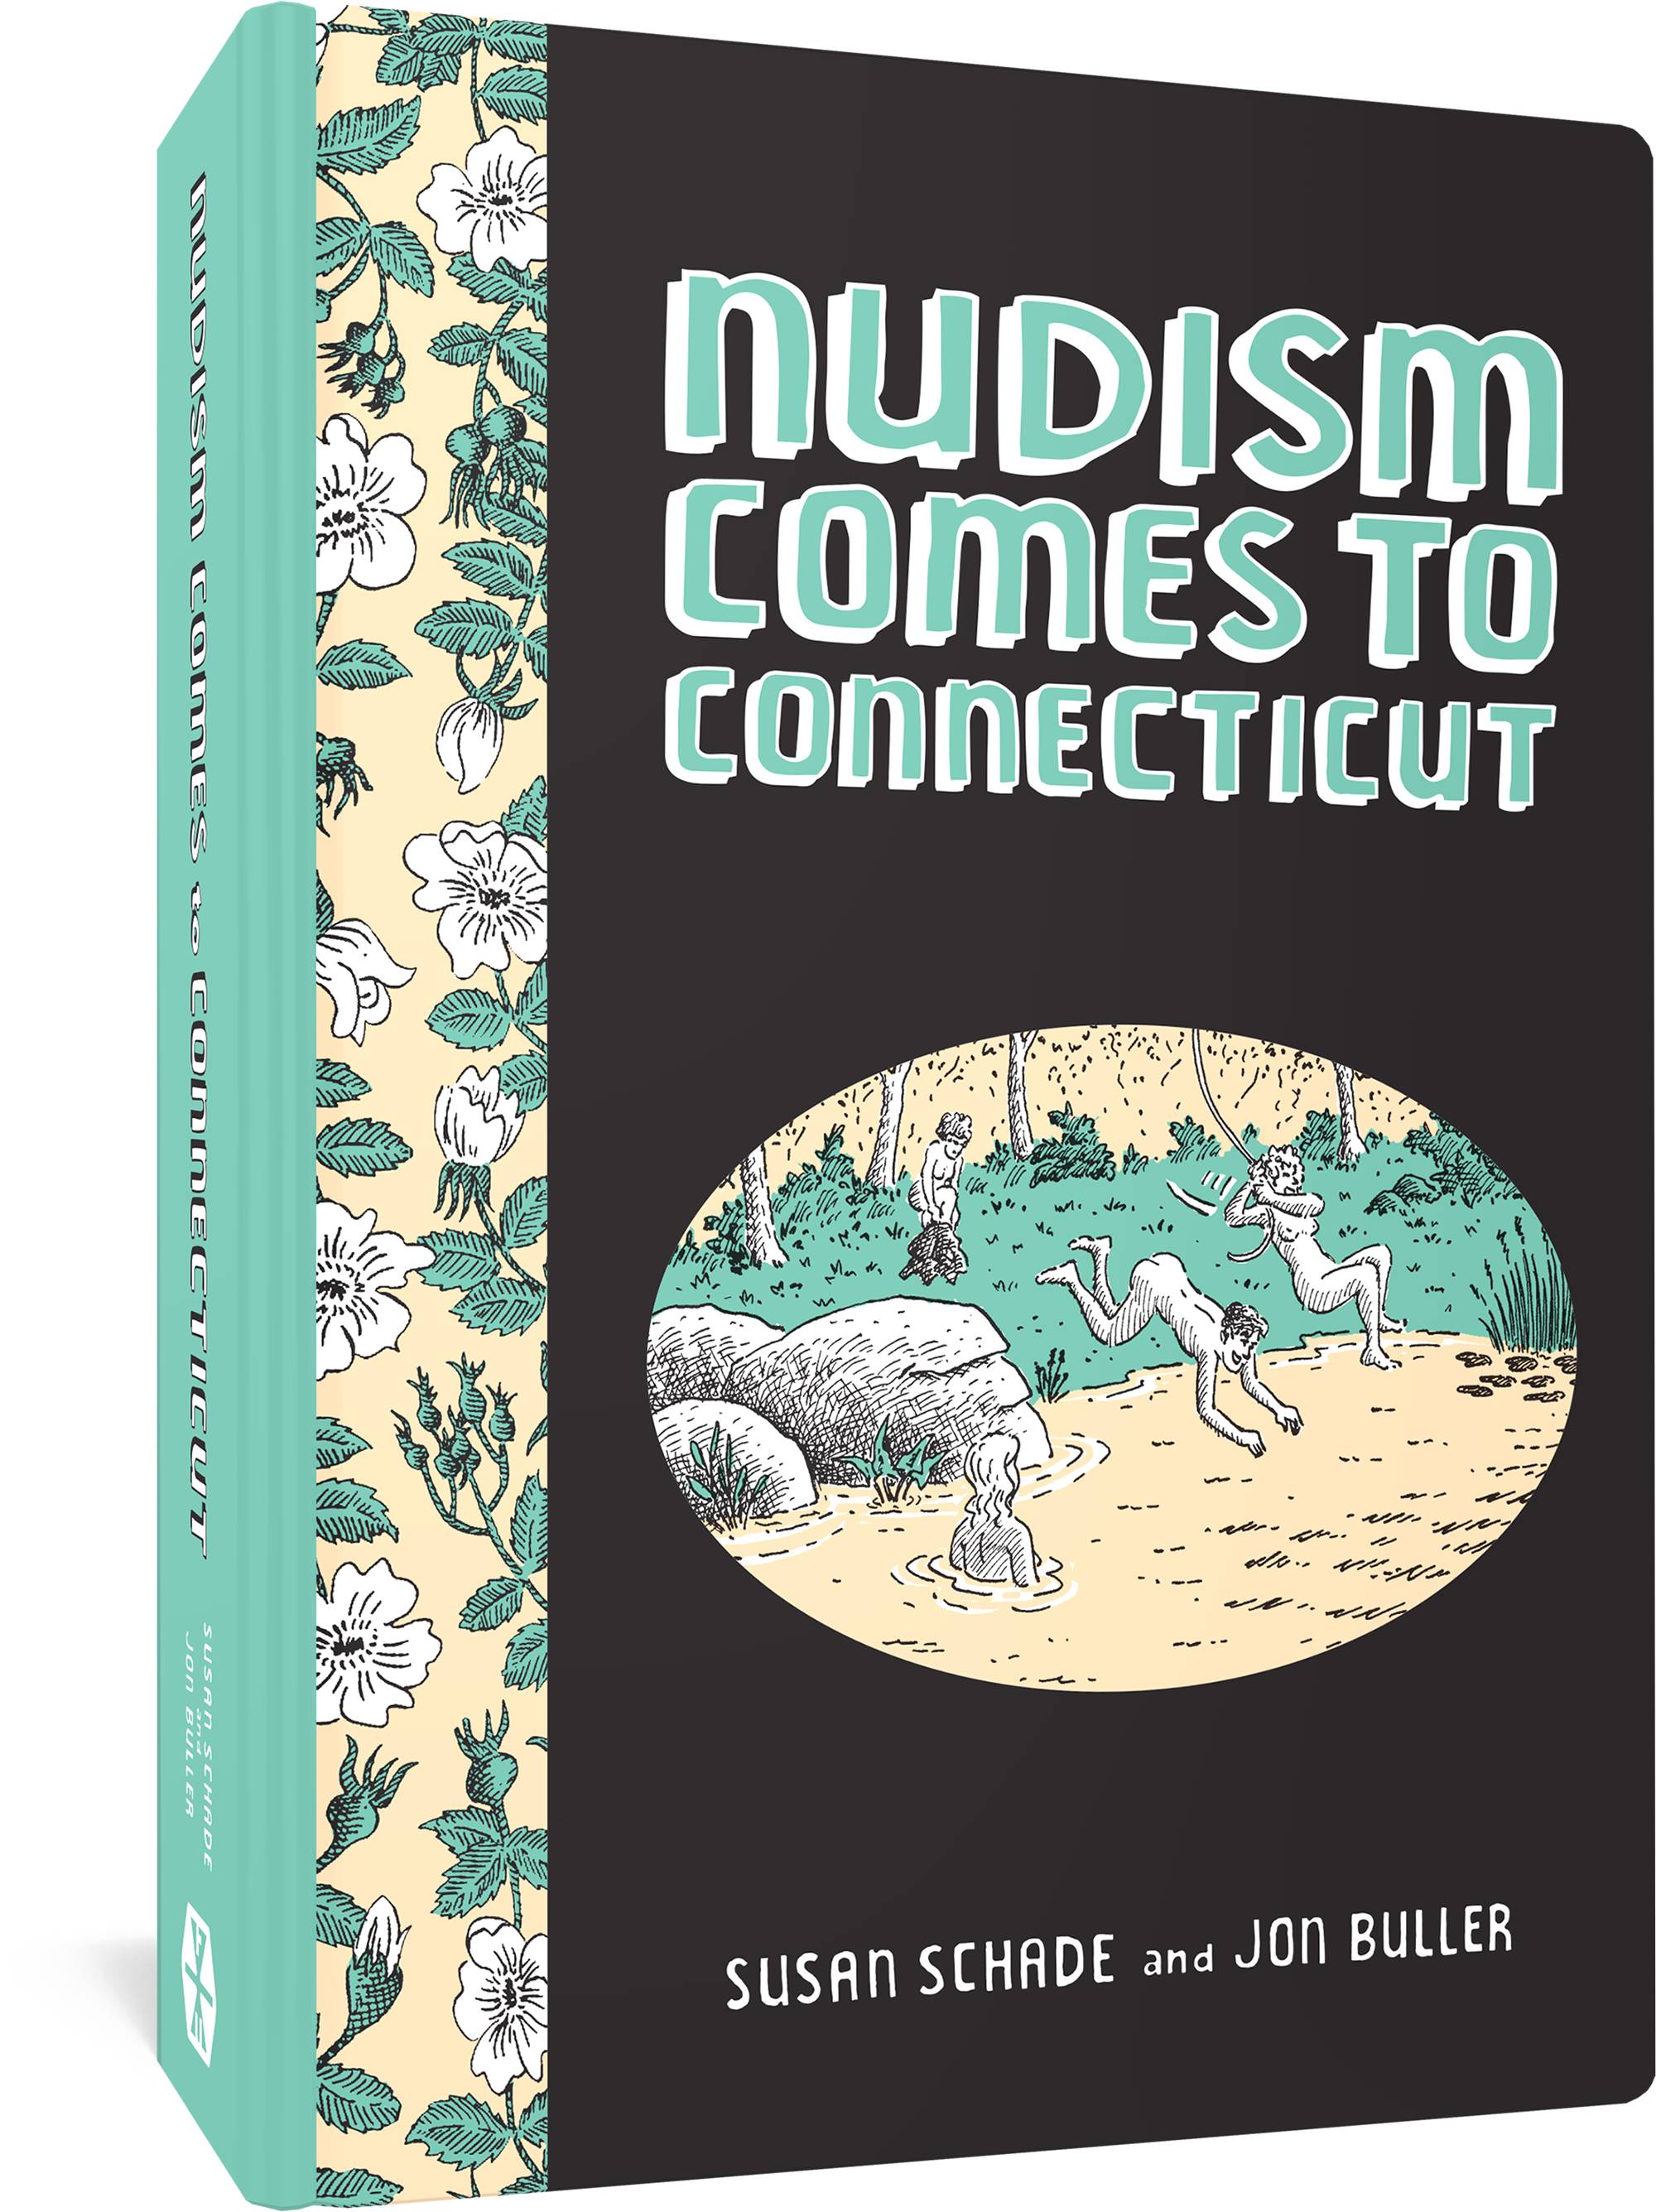 Nudism Comes To Connecticut h/c